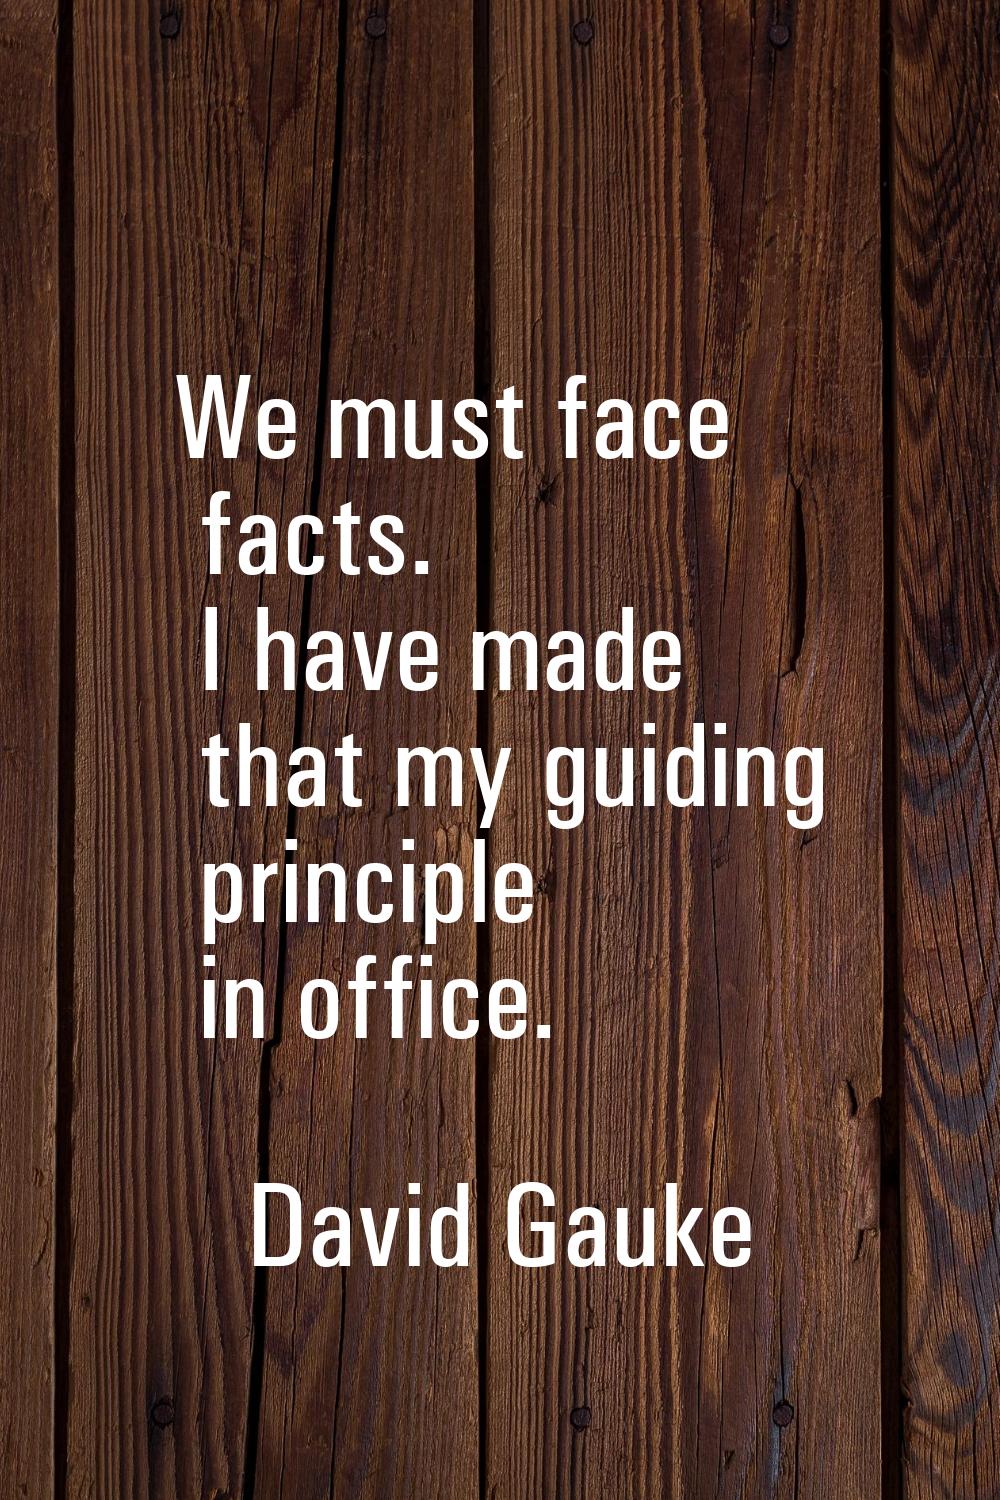 We must face facts. I have made that my guiding principle in office.